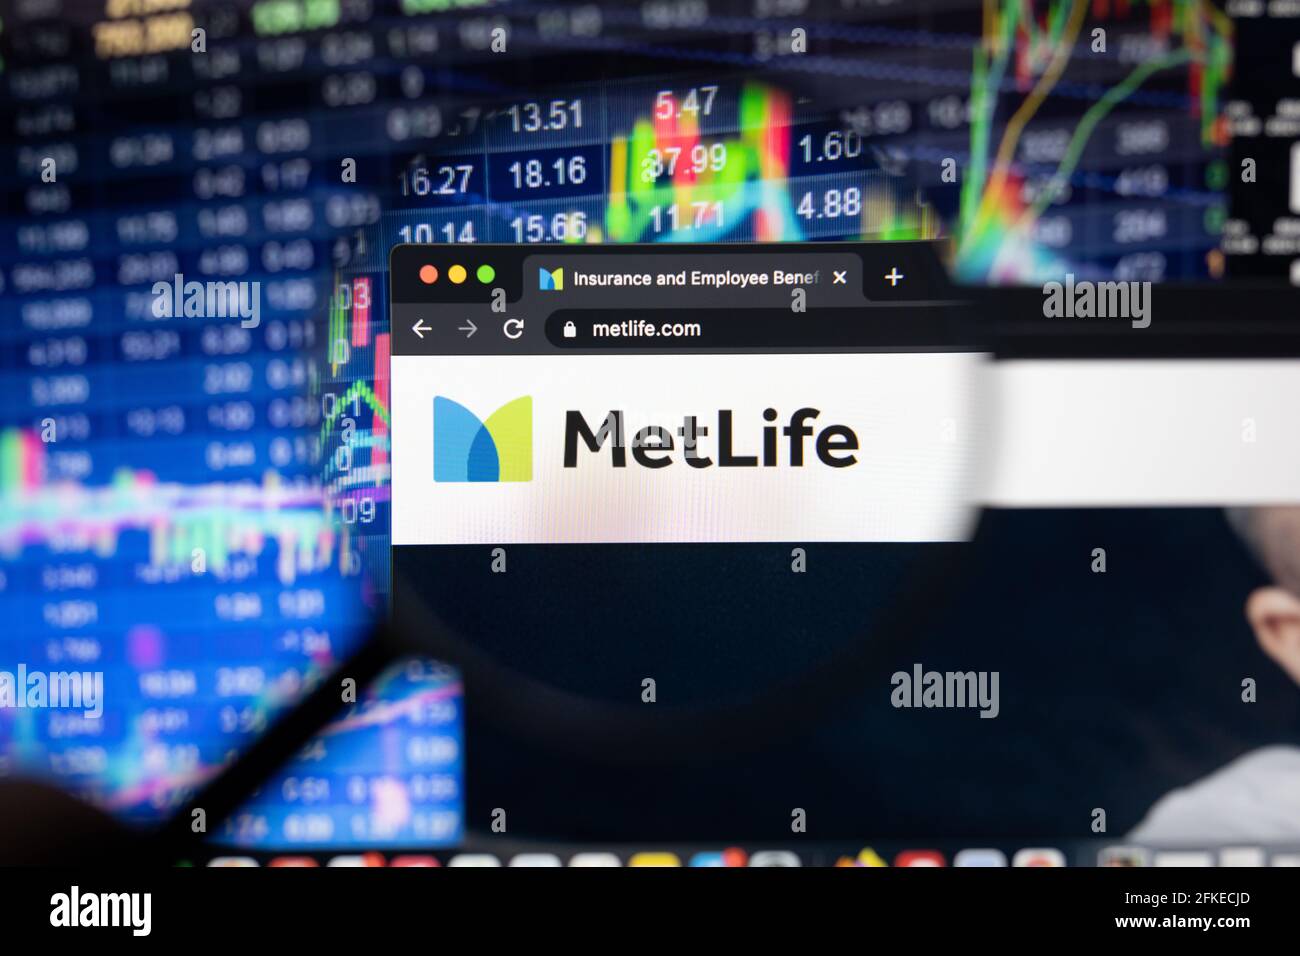 MetLife company logo on a website with blurry stock market developments in the background, seen on a computer screen through a magnifying glass Stock Photo